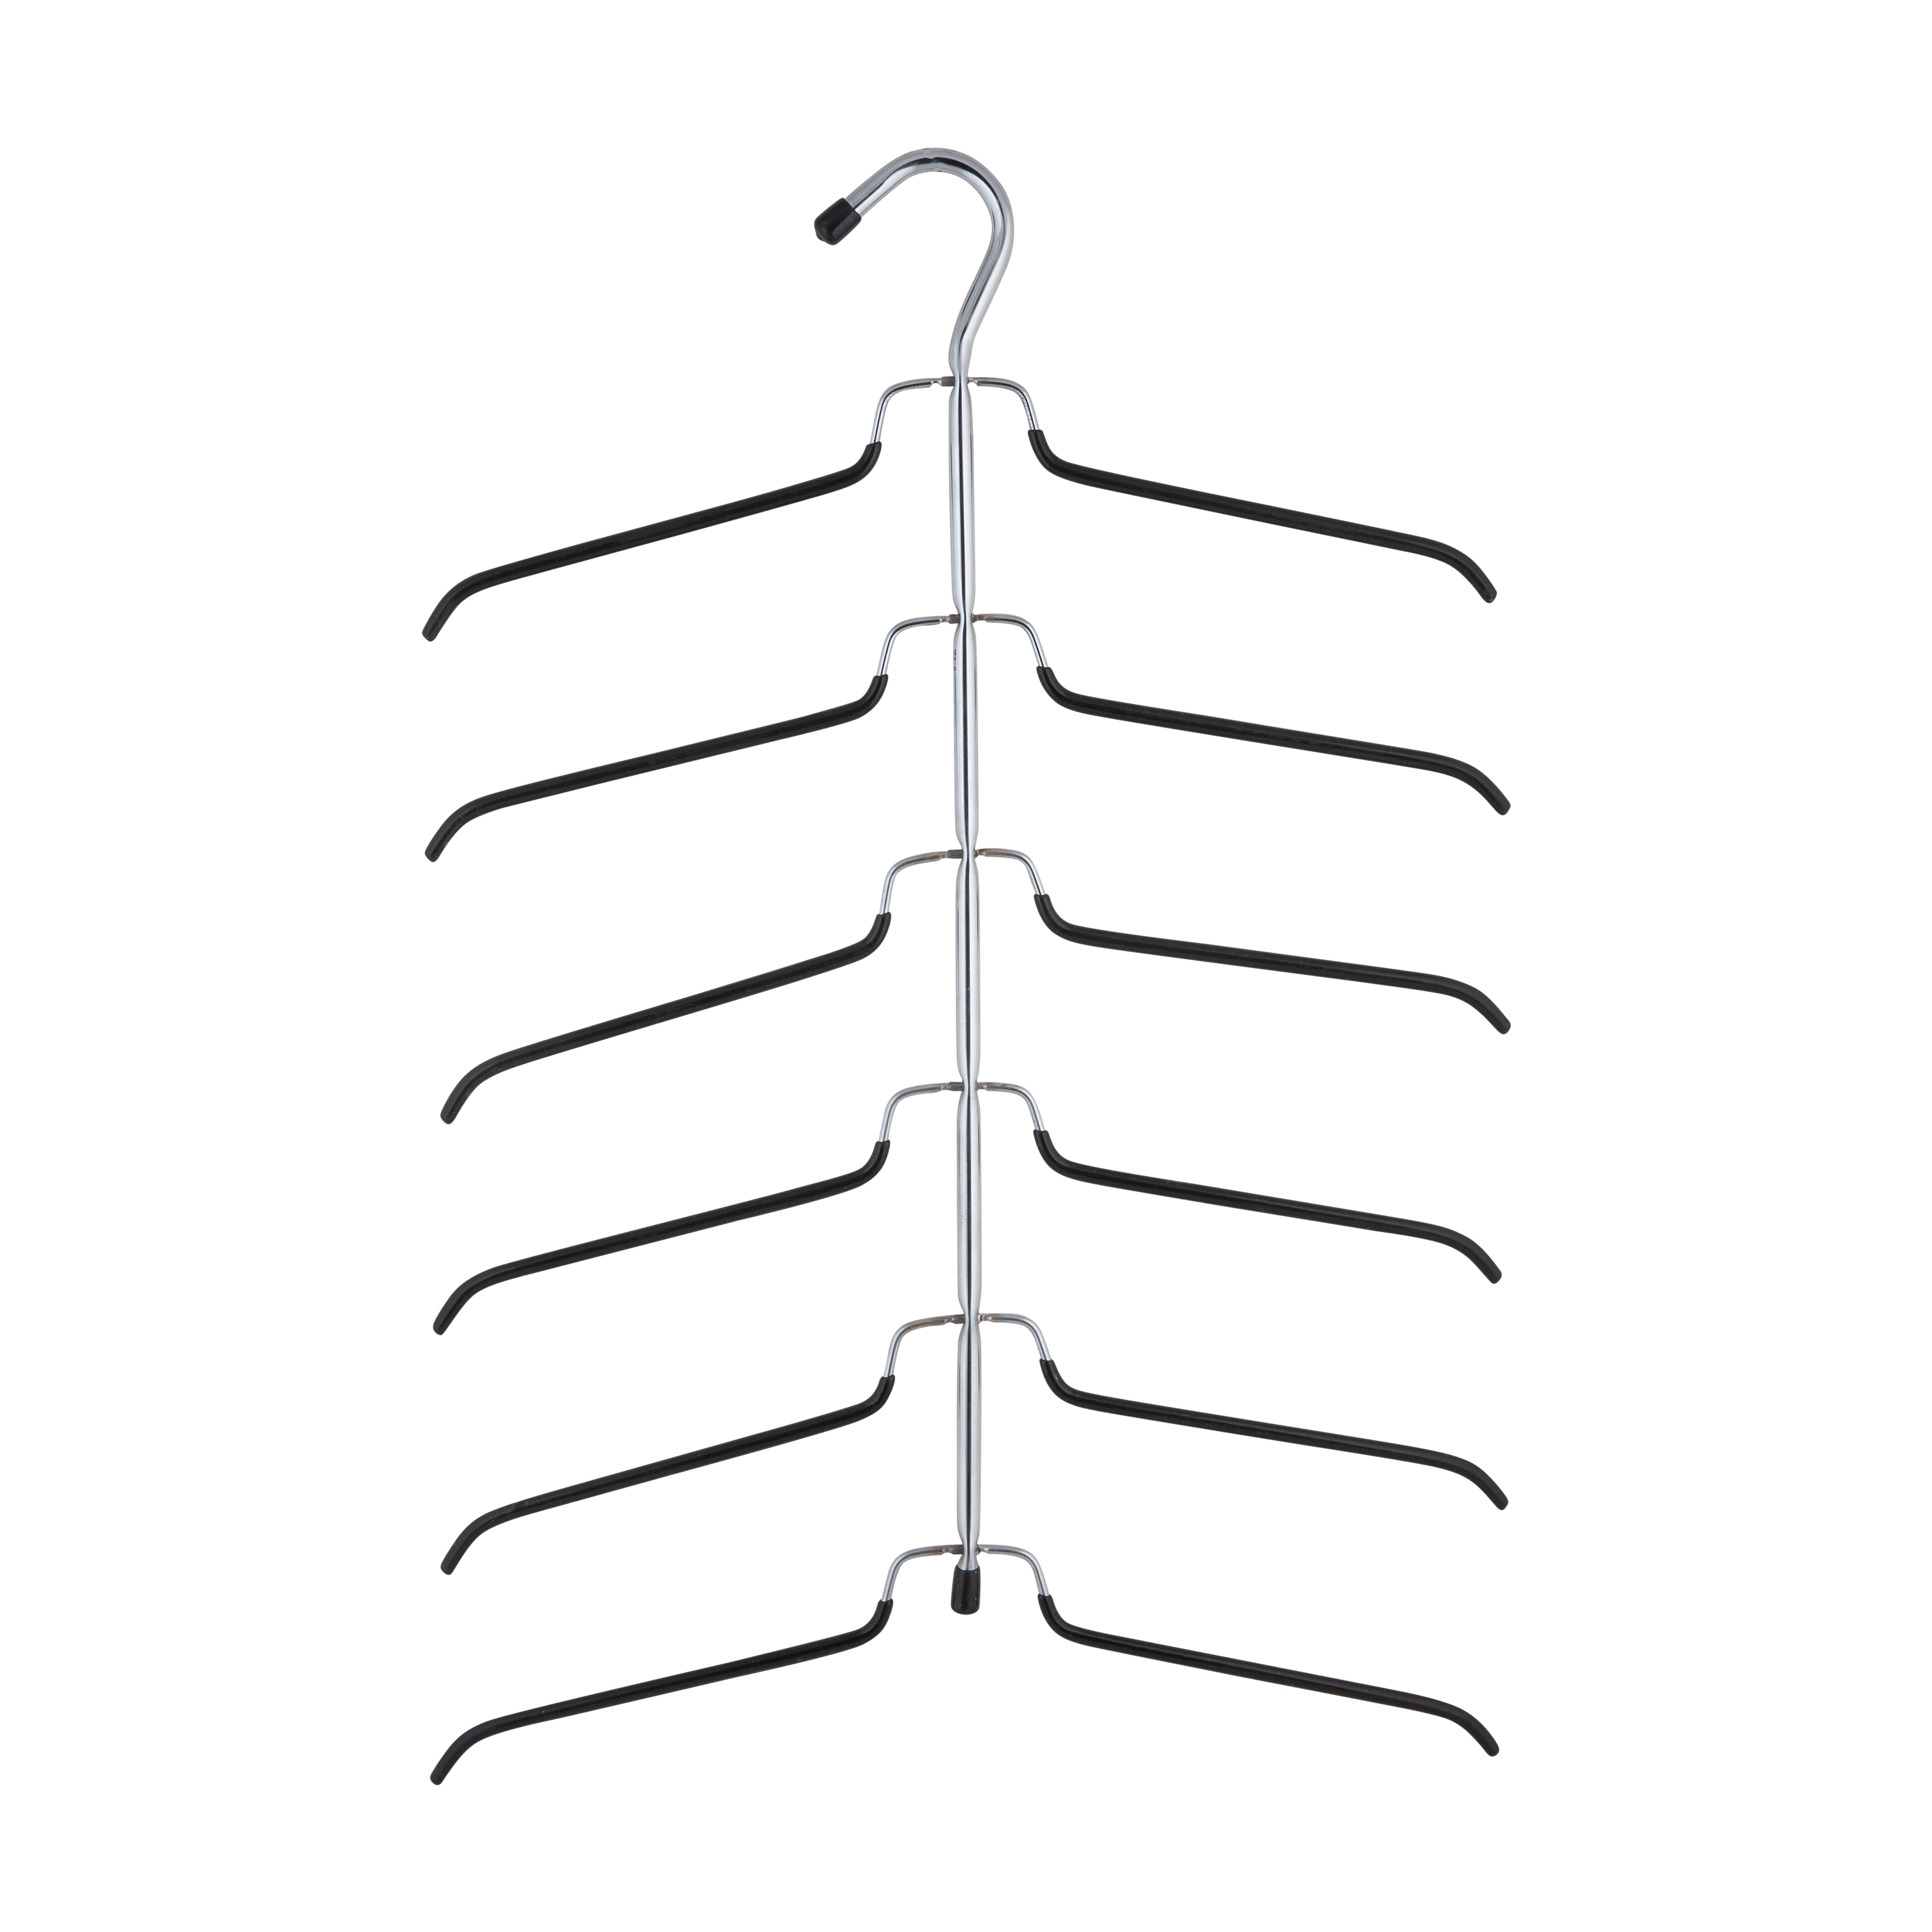 Organize It All 6 Tier Blouse Tree Metal Clothes Shirt Hanger in Chrome - image 1 of 7